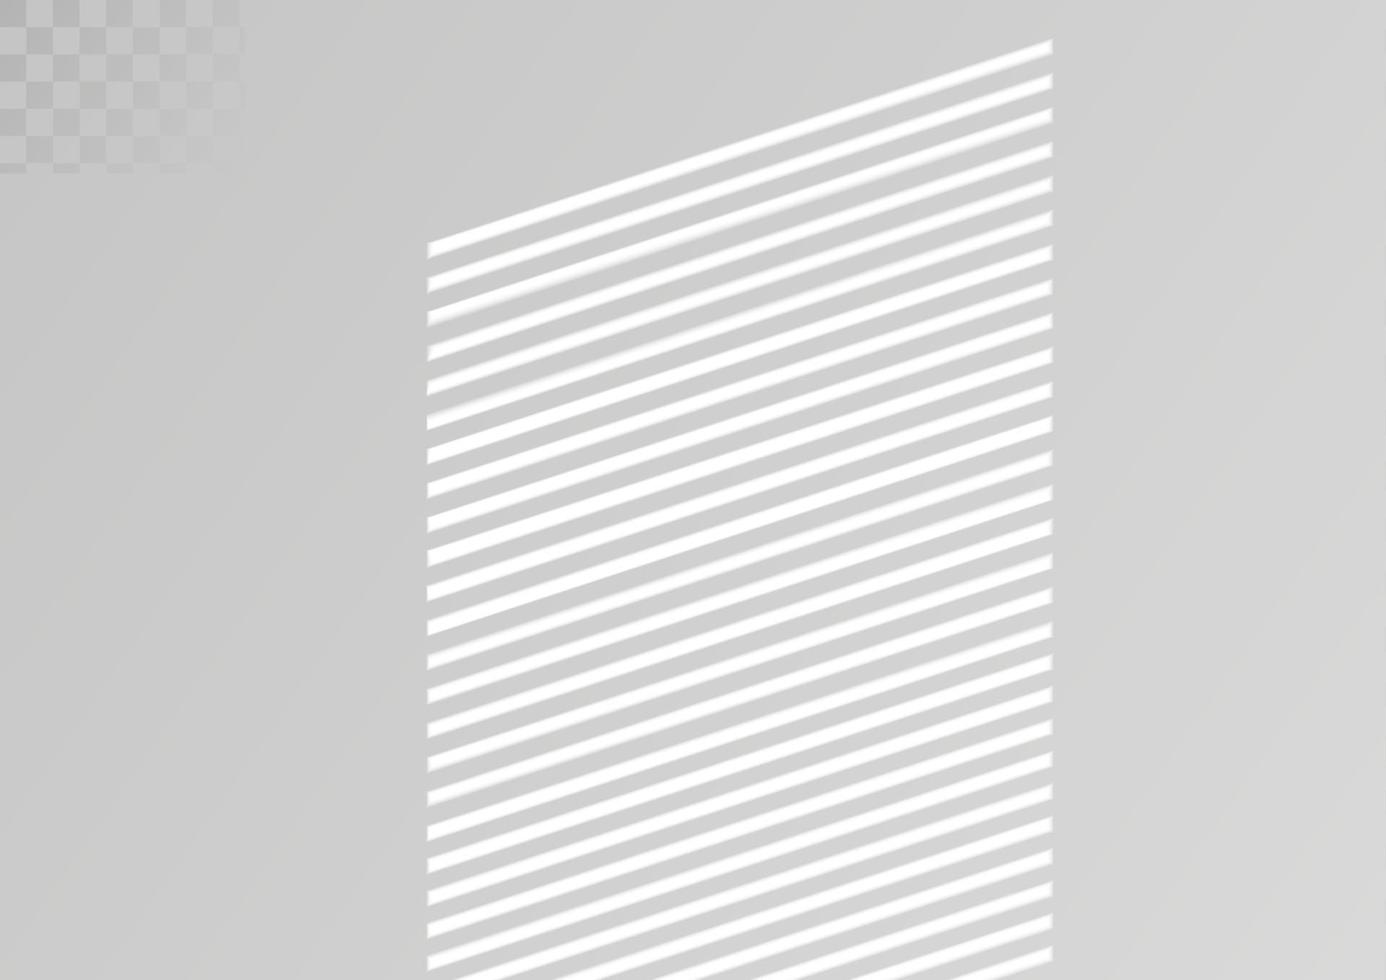 Window and blinds shadow. Realistic light effect of shadows and natural lighting. Vector illustration